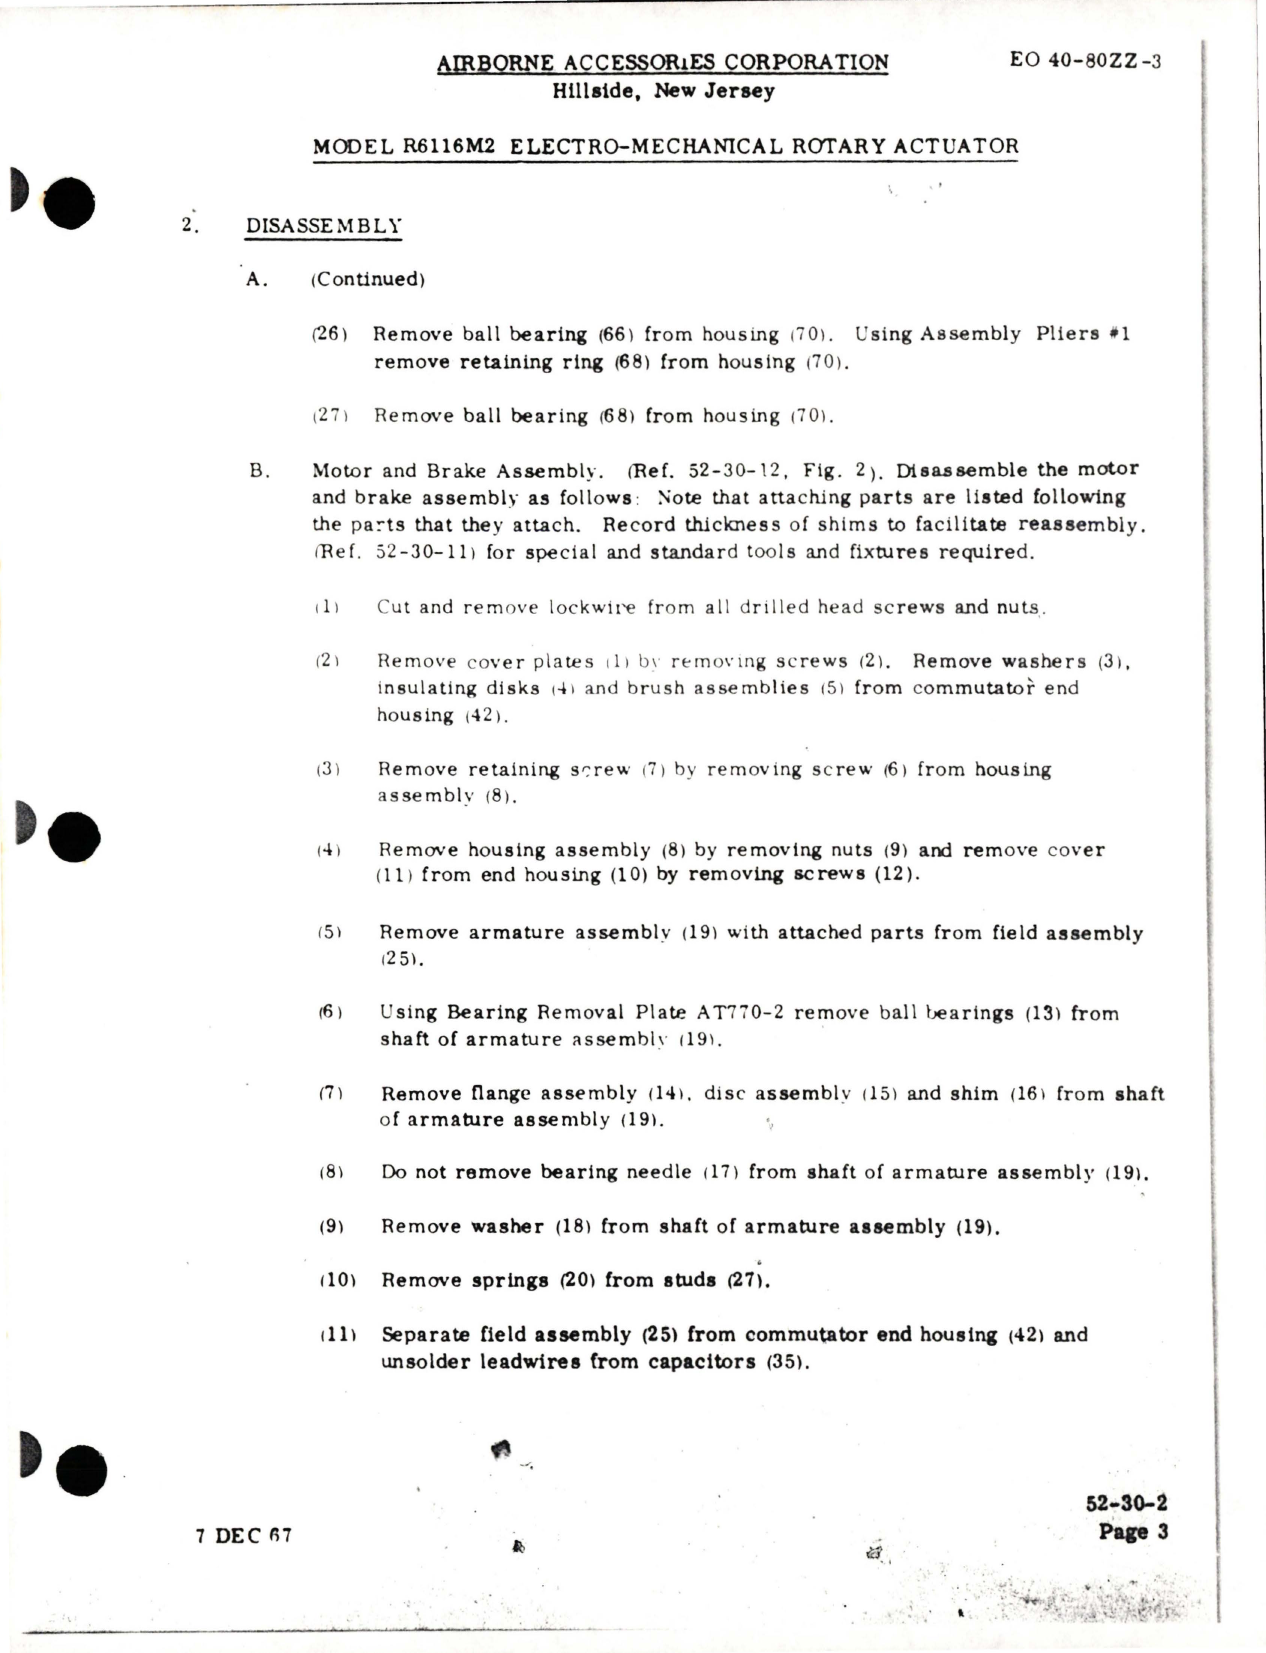 Sample page 9 from AirCorps Library document: Handbook with Parts List for Electro-Mechanical Rotary Actuator Model R6116M2 